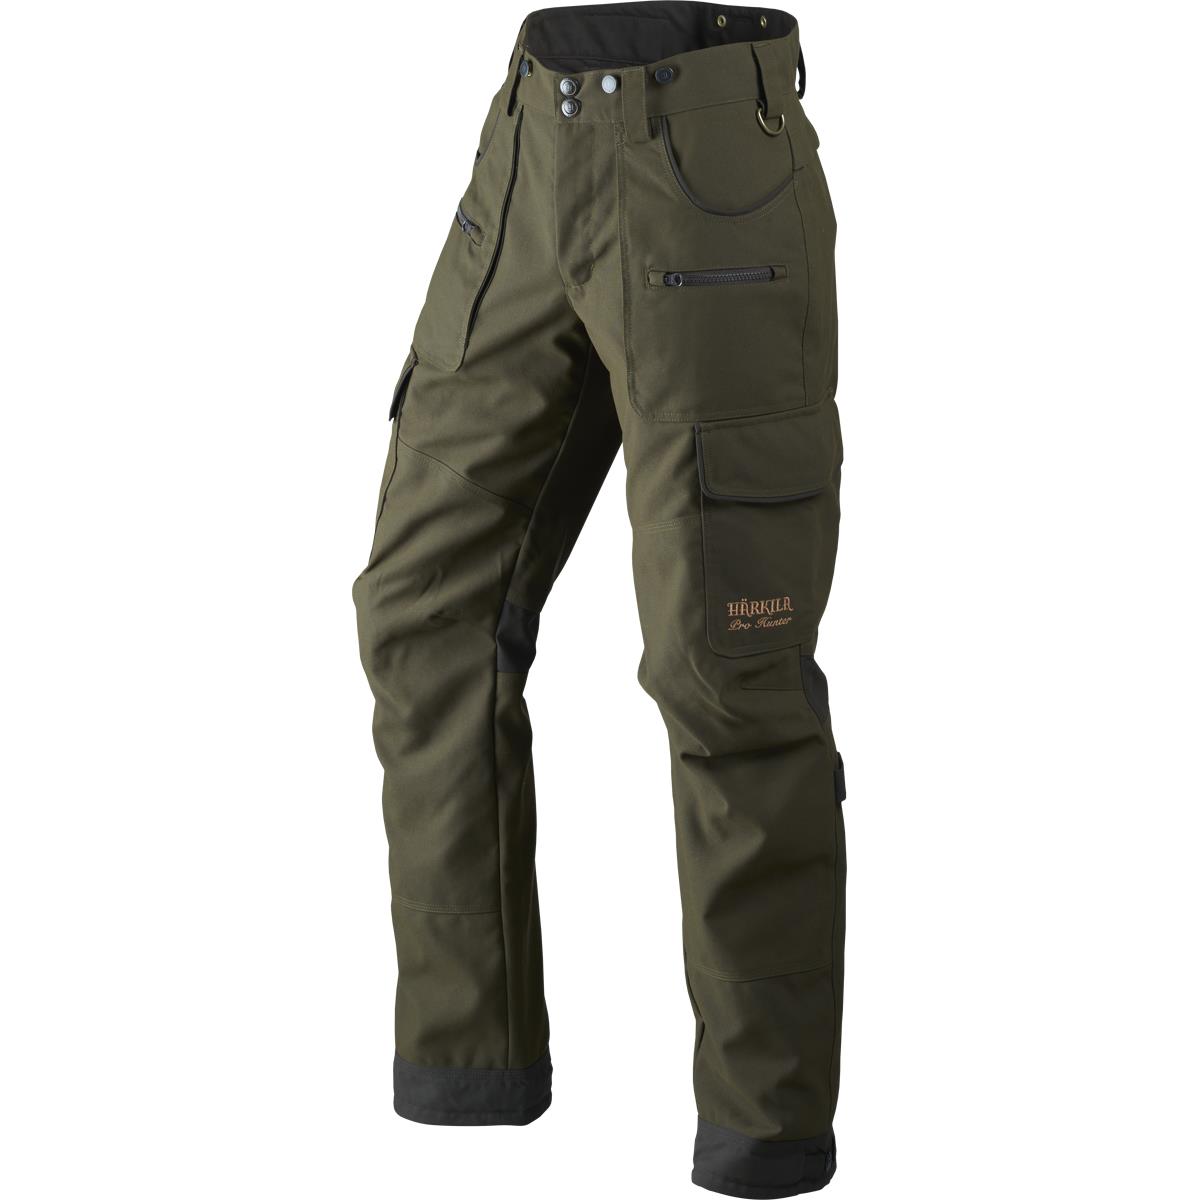 What lining is found in the Harkila Pro Hunter trousers?